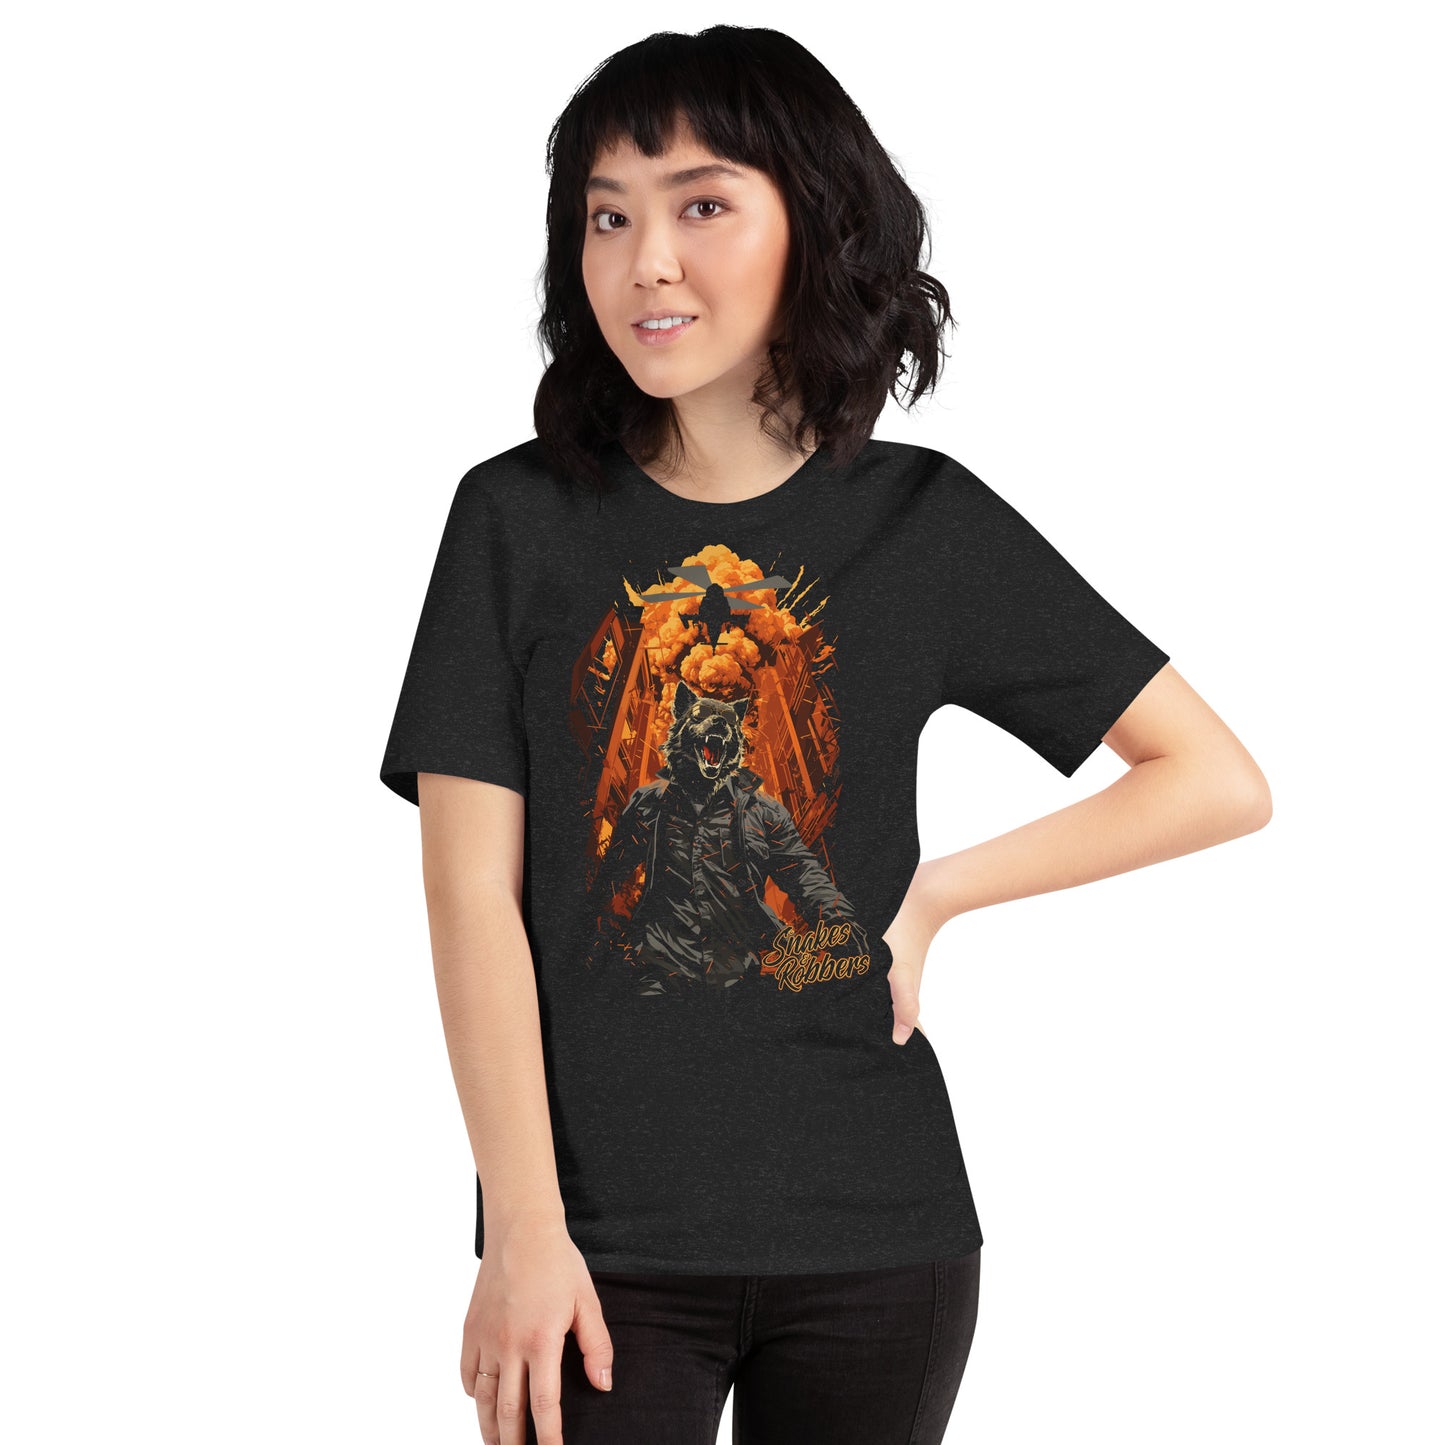 Lone Wolf walking away from Explosion Unisex Retail Fit T-shirt